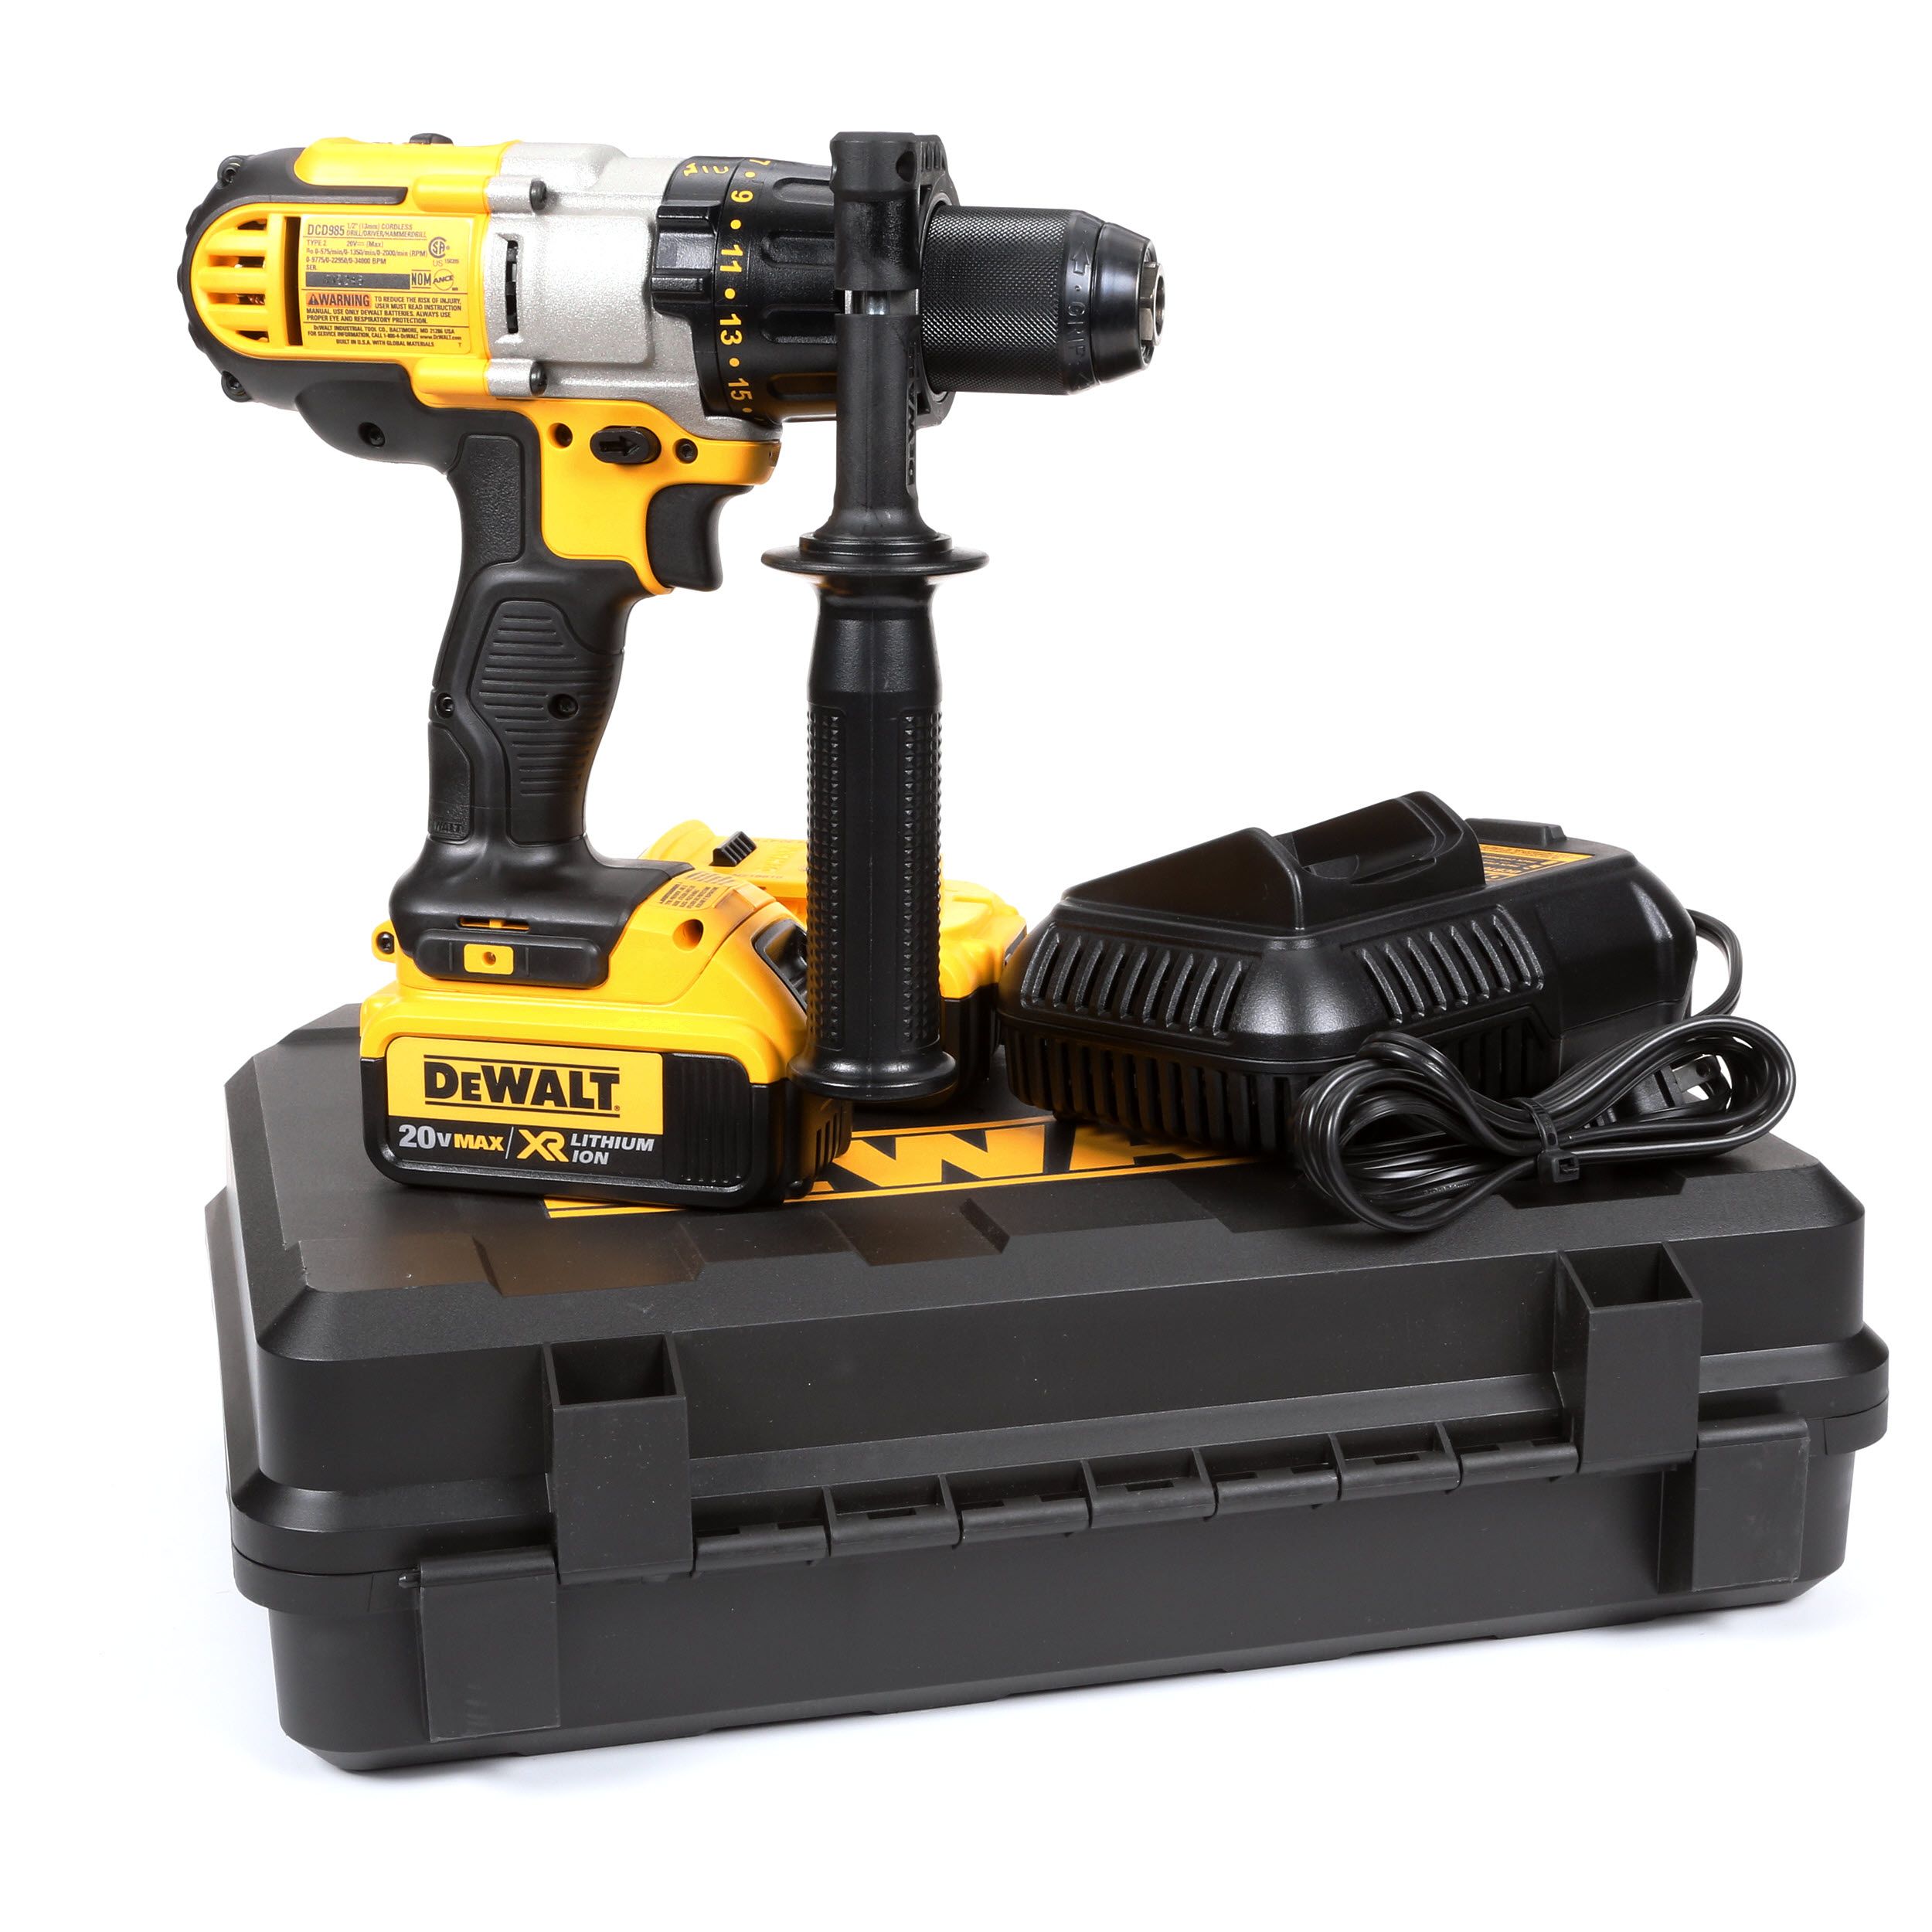 DEWALT 20-volt Max Speed Cordless Drill (2-Batteries Included) at Lowes.com